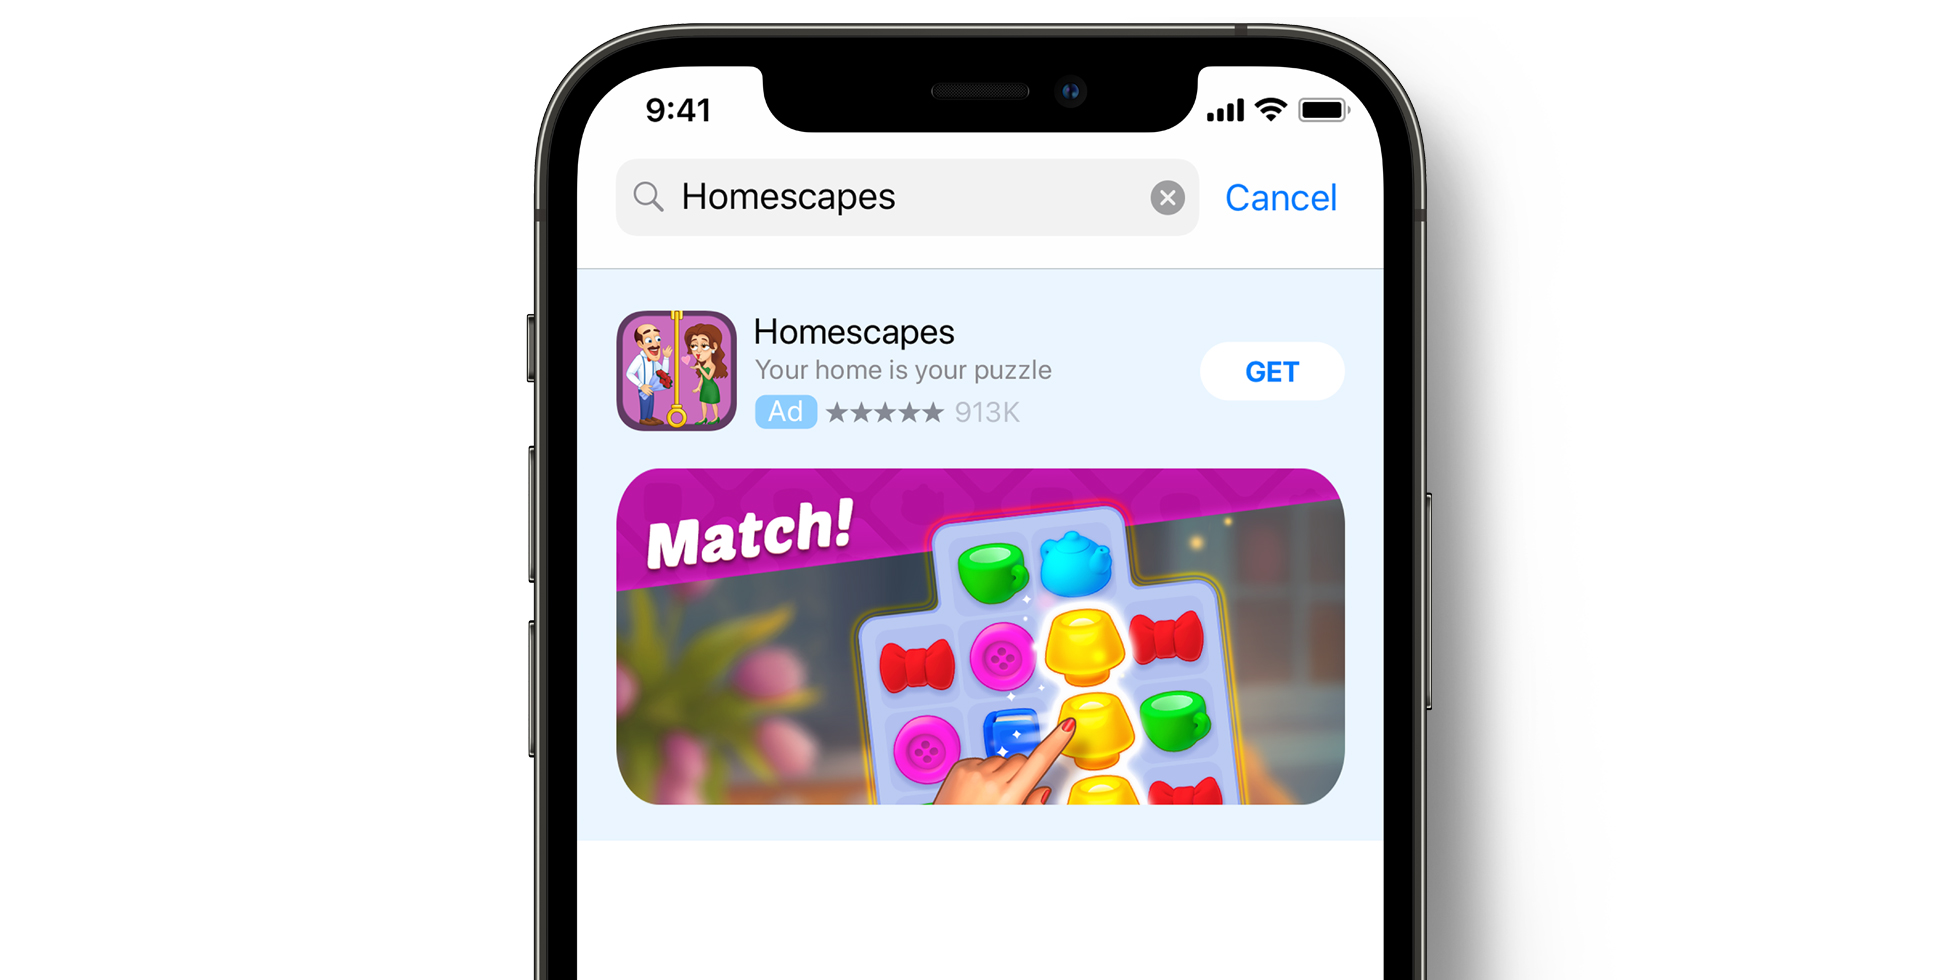 App Store의 Homescapes Apple Search Ads 광고